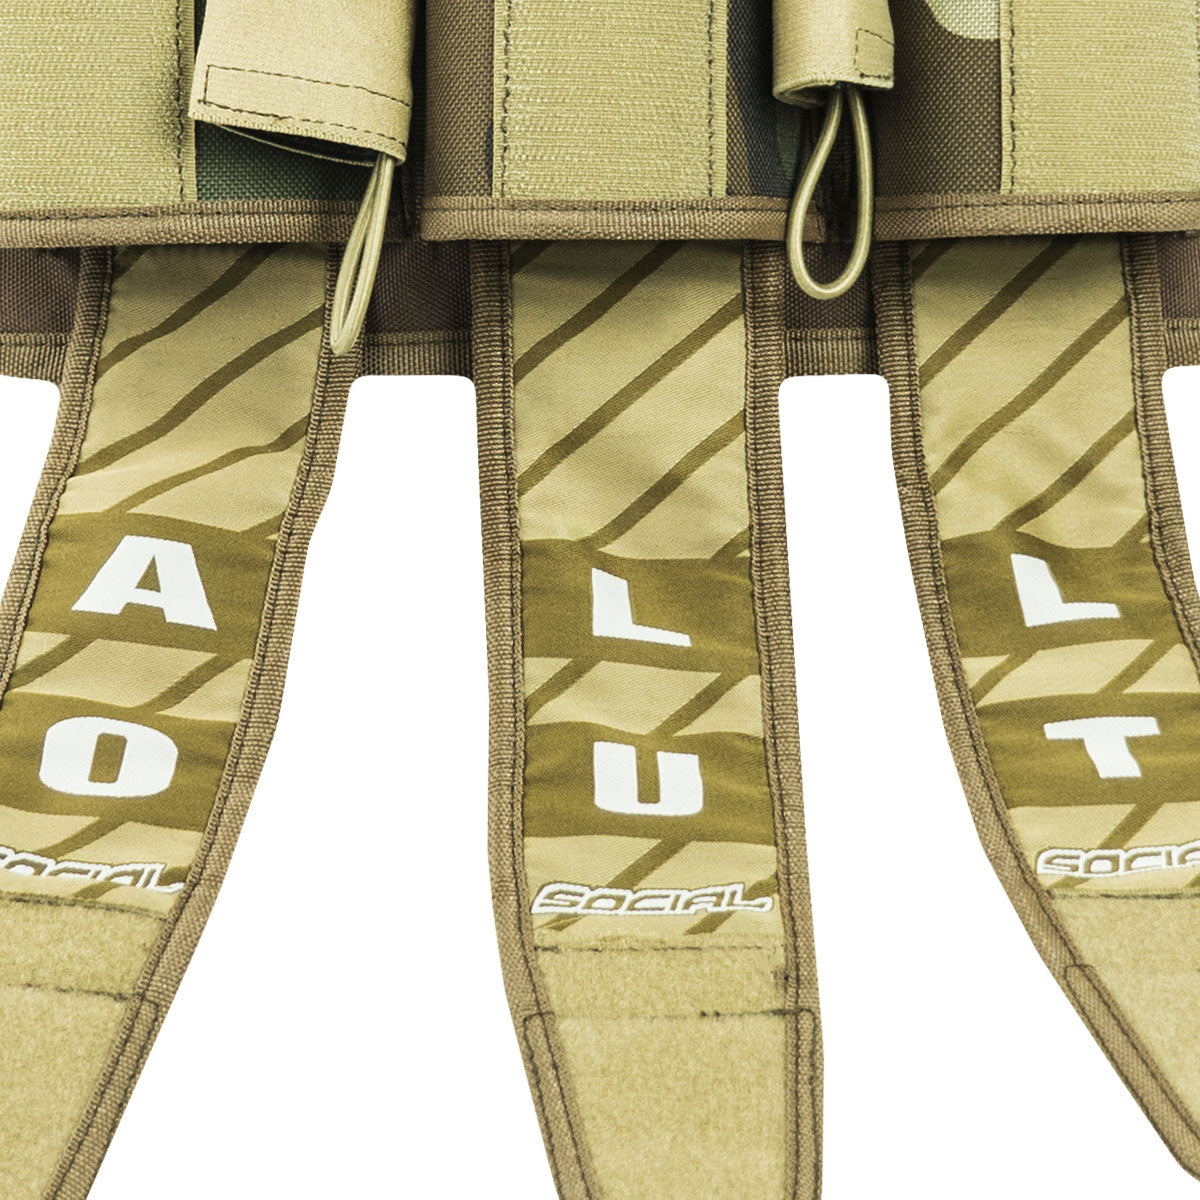 Grit Pod Pack Harness, 3+6, Coyote Tan Woodland Camo | Social Paintball Harness